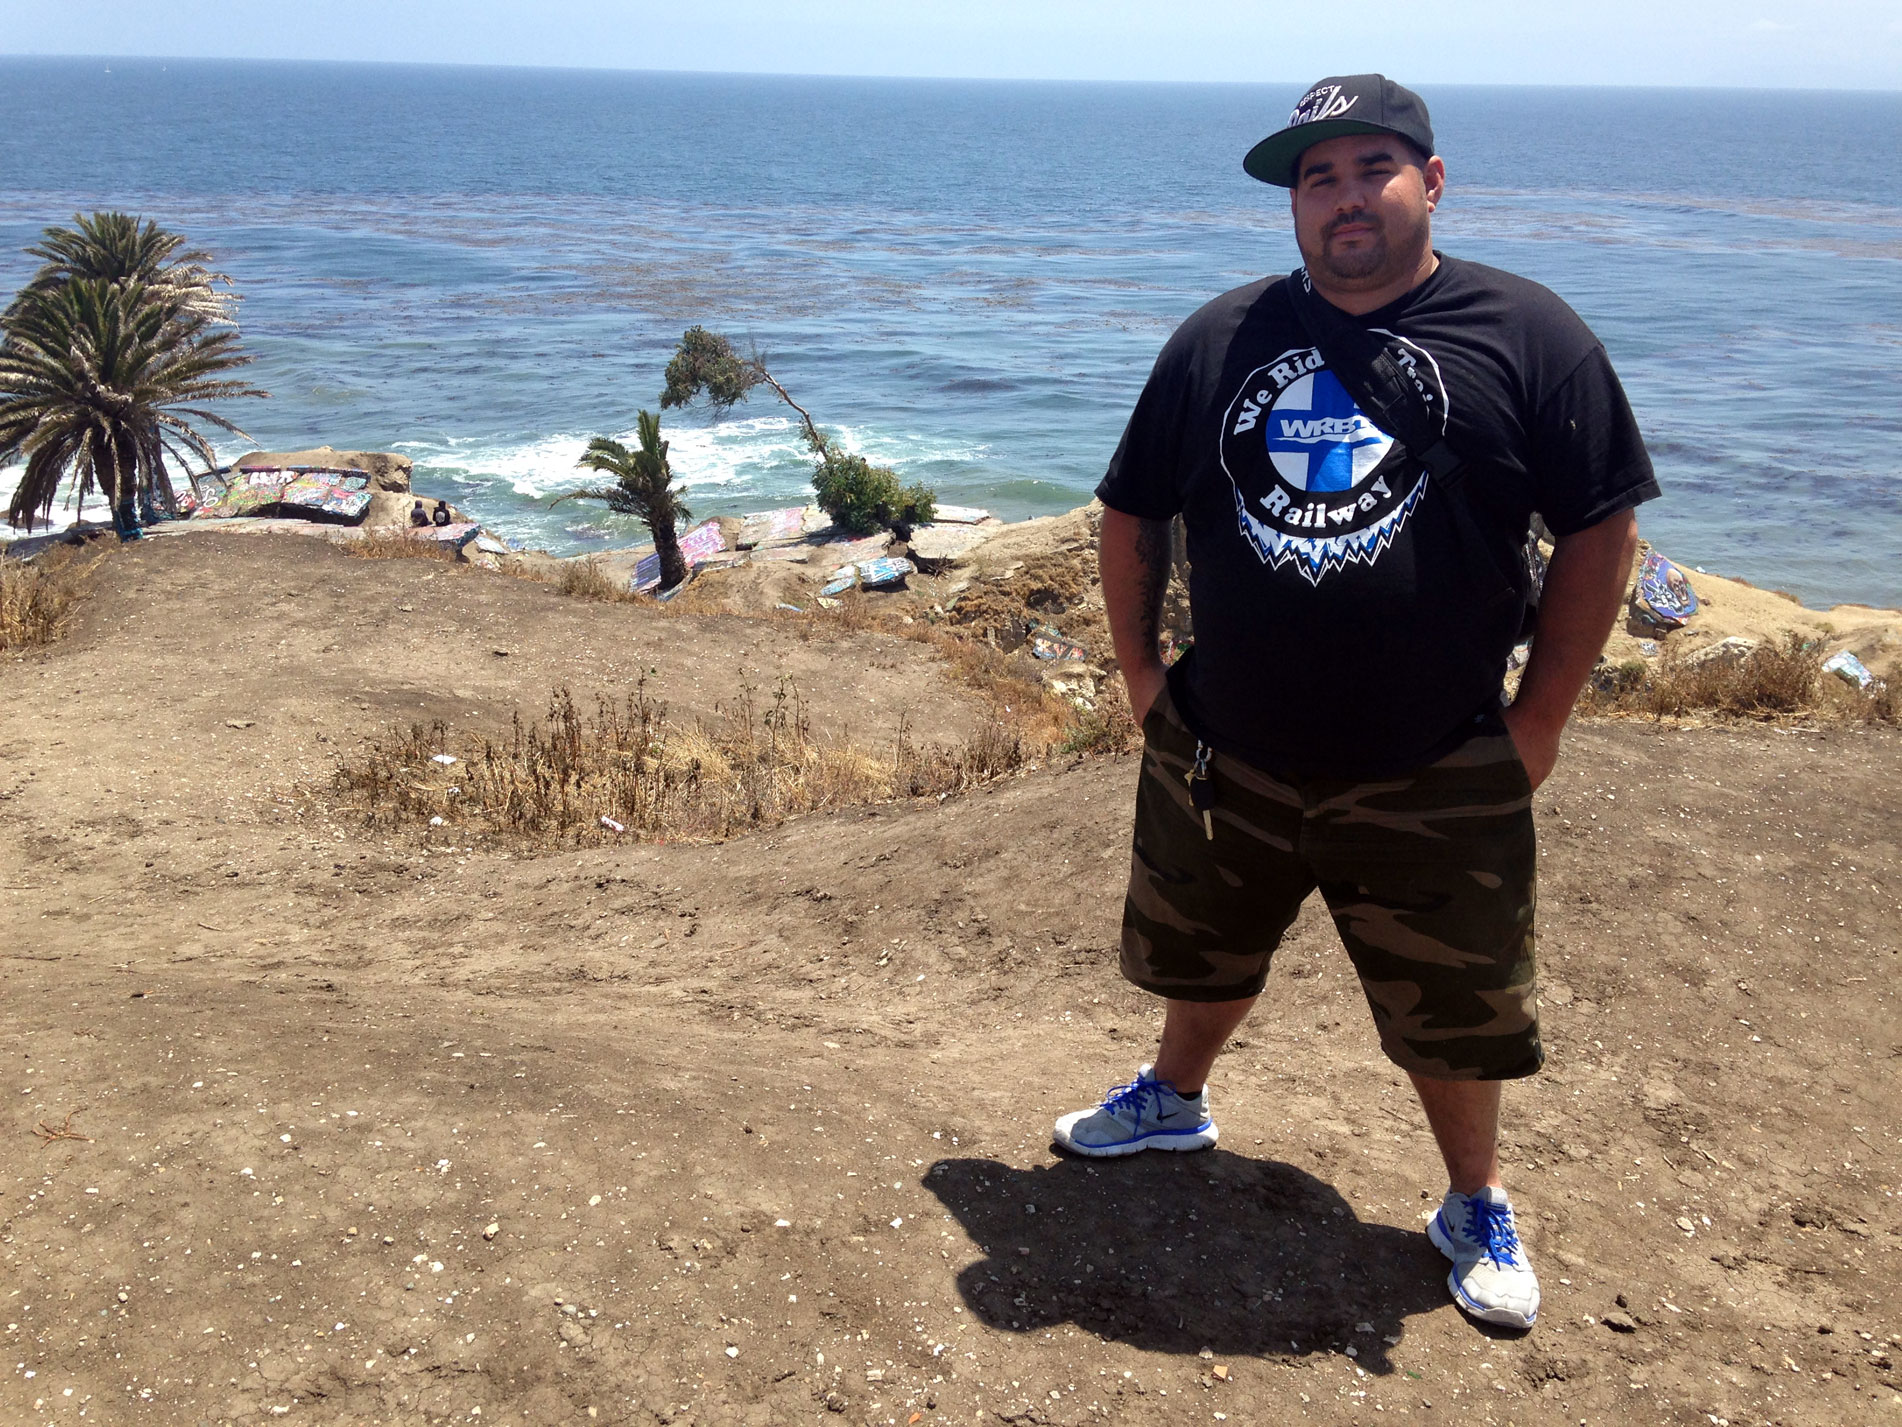 Anthony Bora likes to explore Sunken City’s winding trails and graffiti, and admire the view. “This is one of the most beautiful views that I’ve seen in Southern California,” he said.